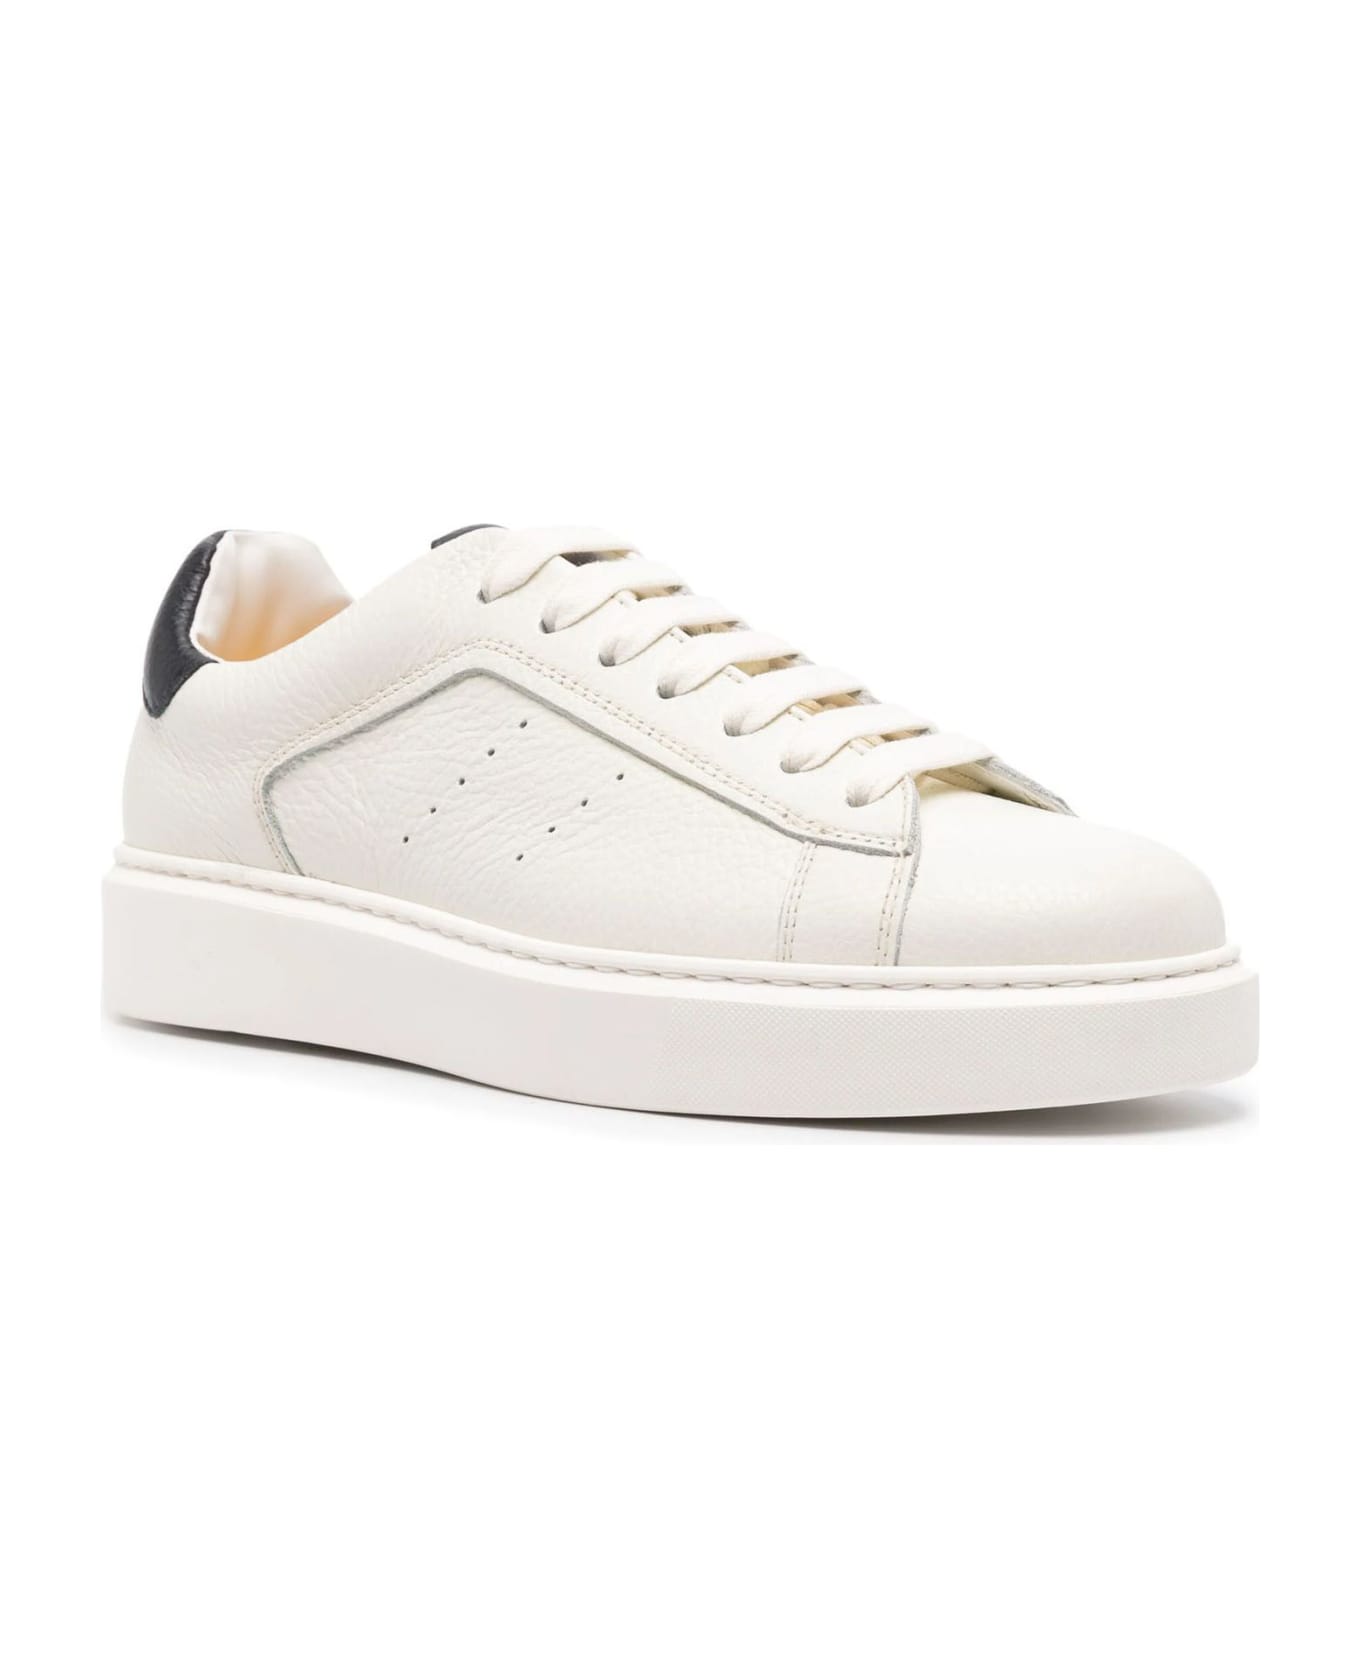 Doucal's White Calf Leather Sneakers - Panna スニーカー